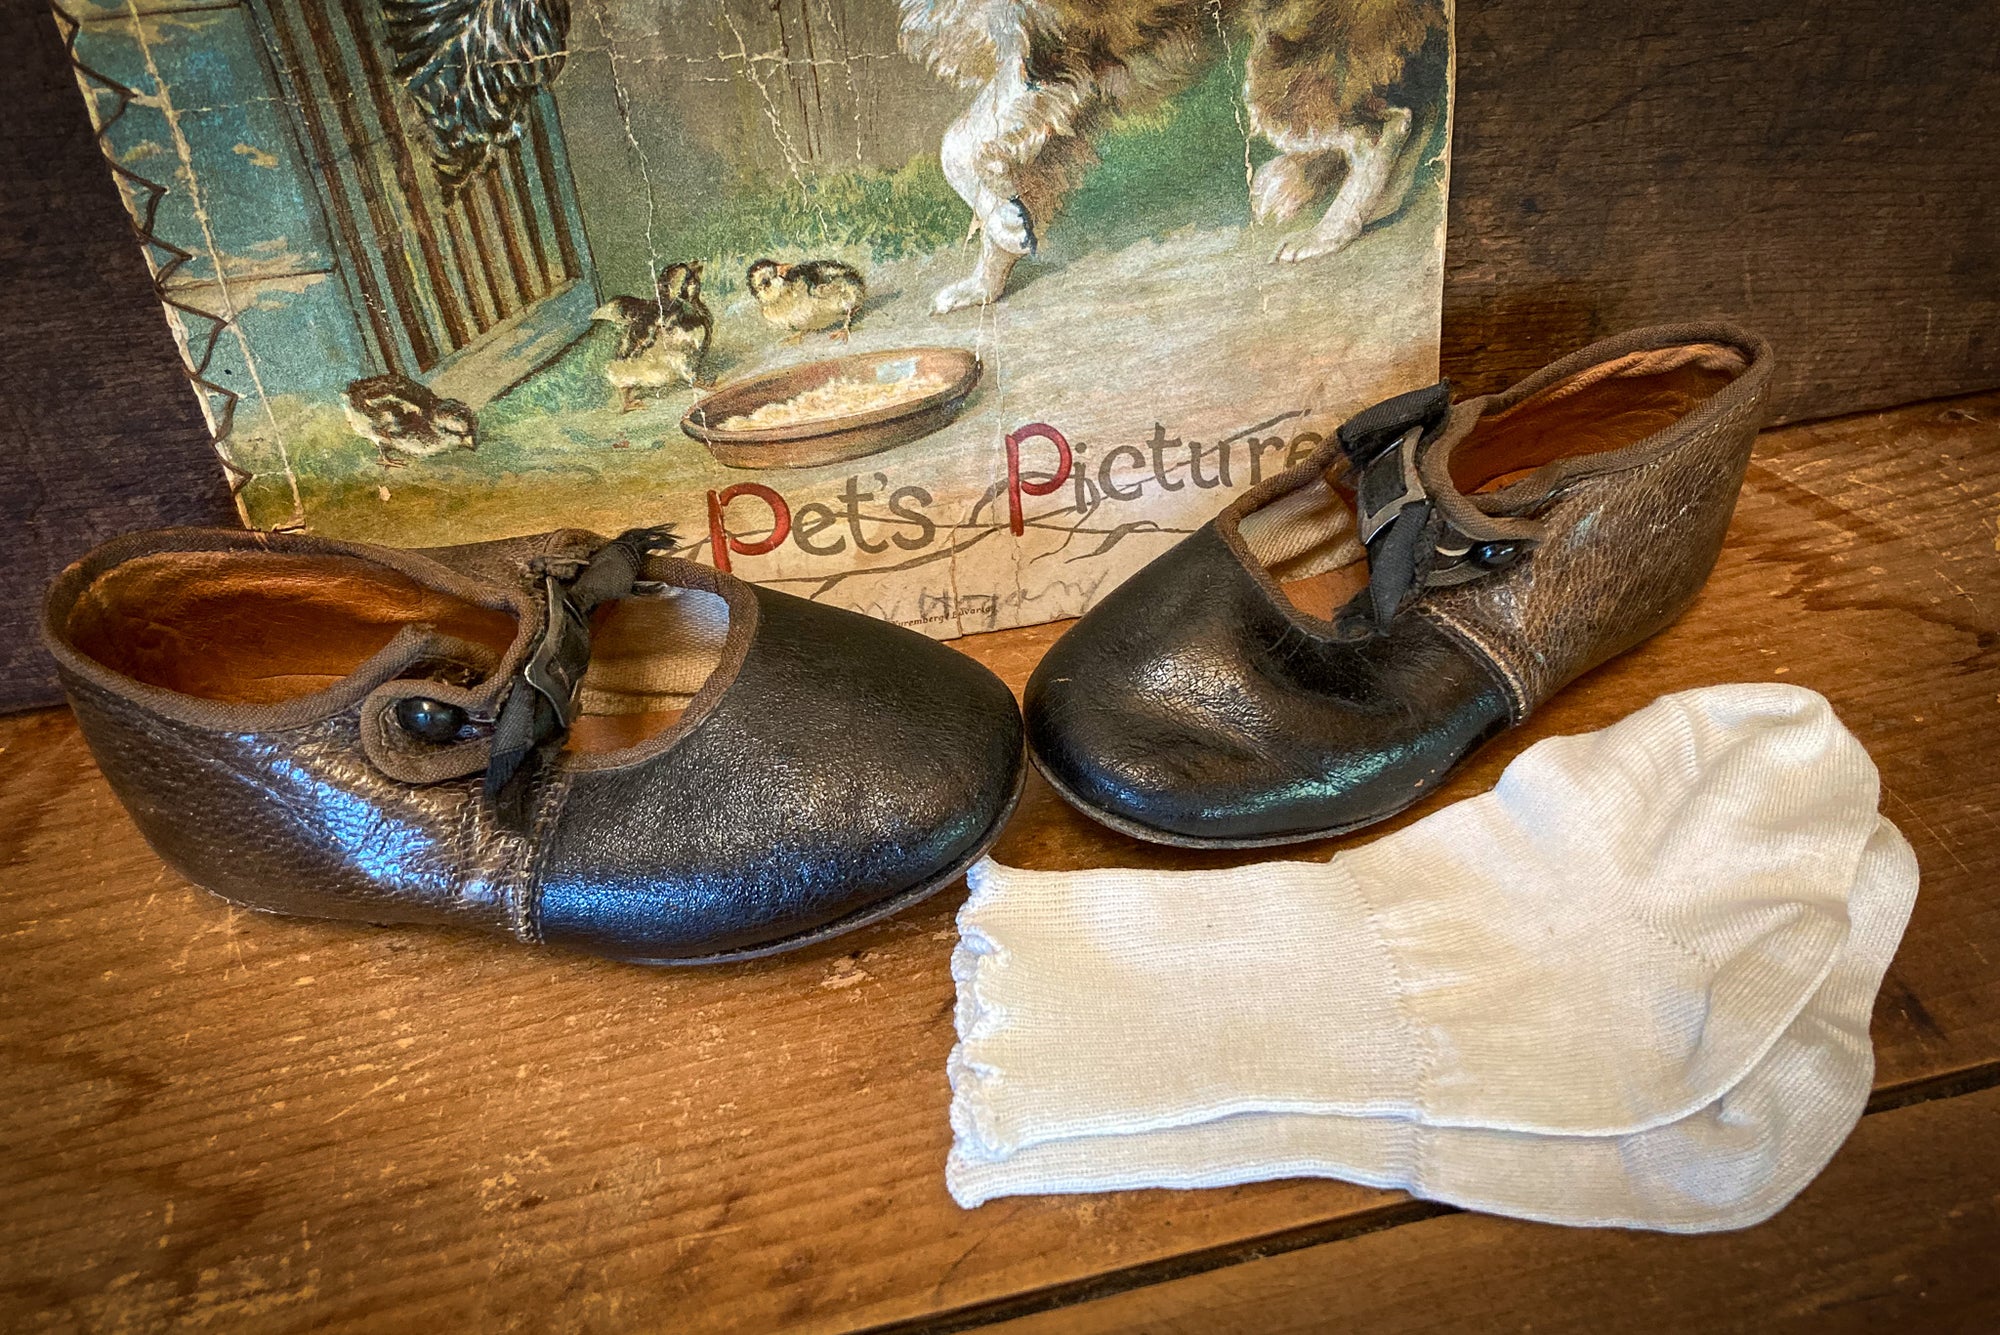 Early 1900’s Leather Baby Shoes with Socks, Buttons and Buckles!